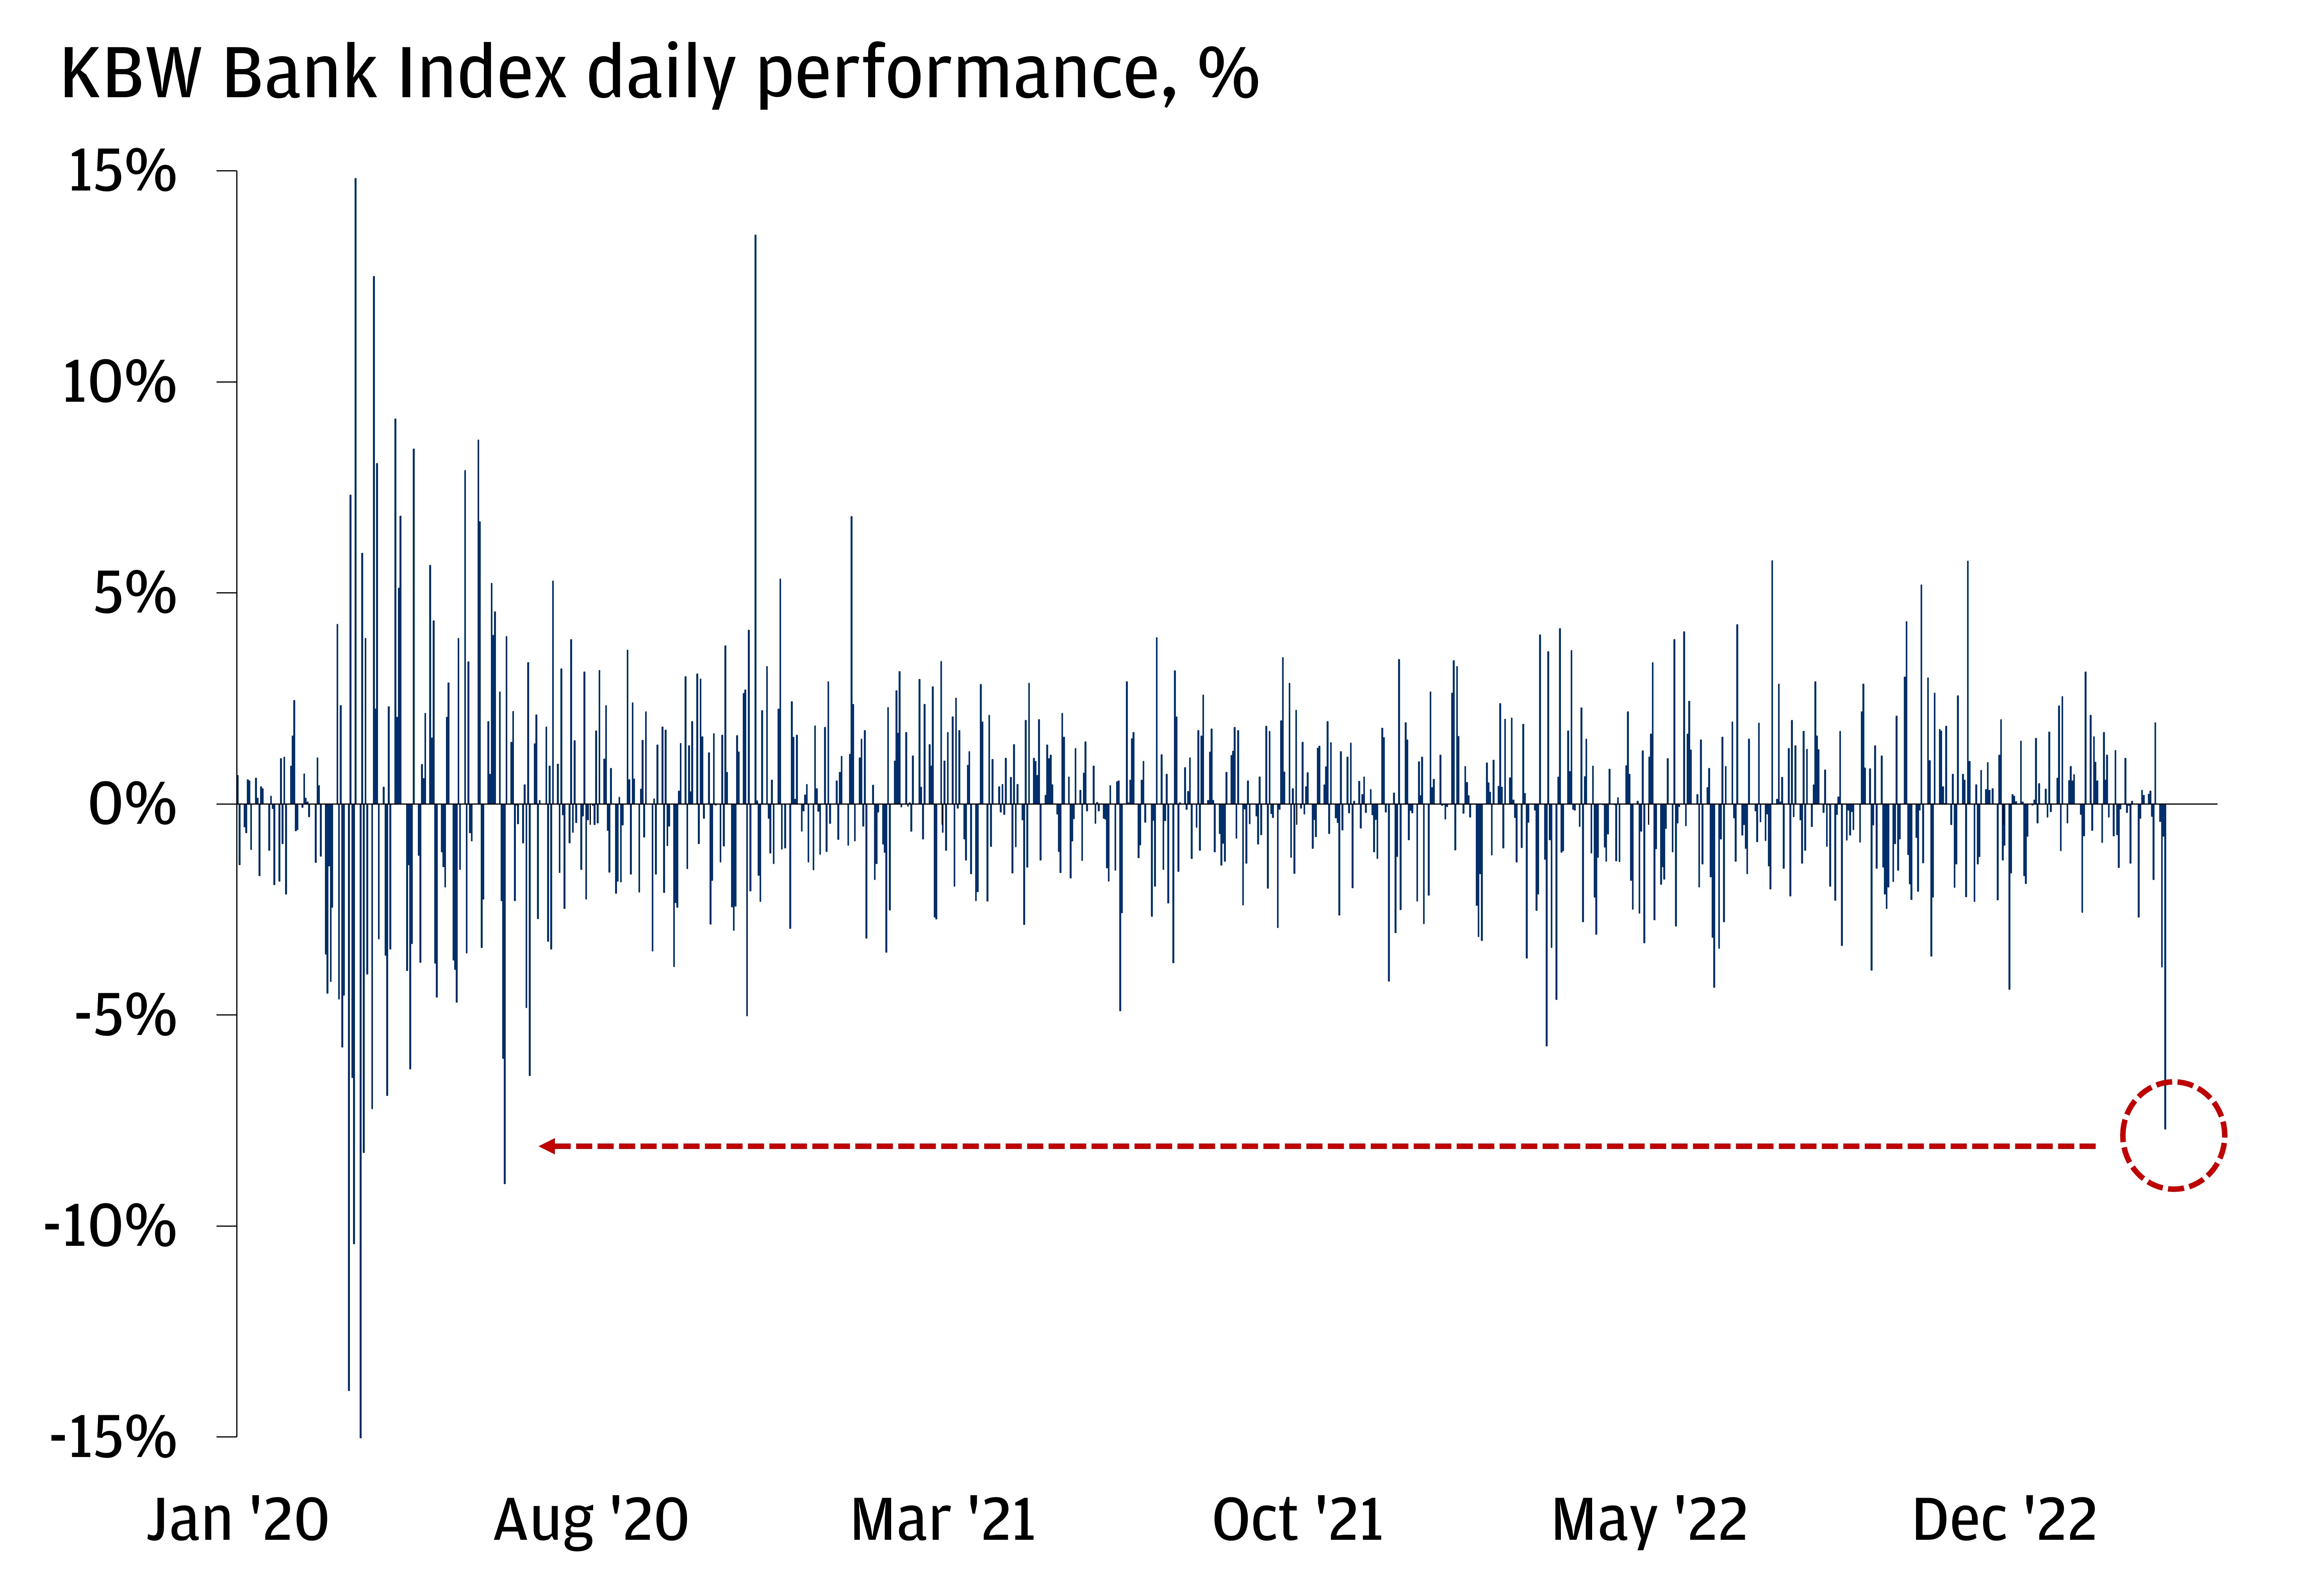 The chart shows the daily performance of the KBW Bank Index from January 2020 to March 2023.